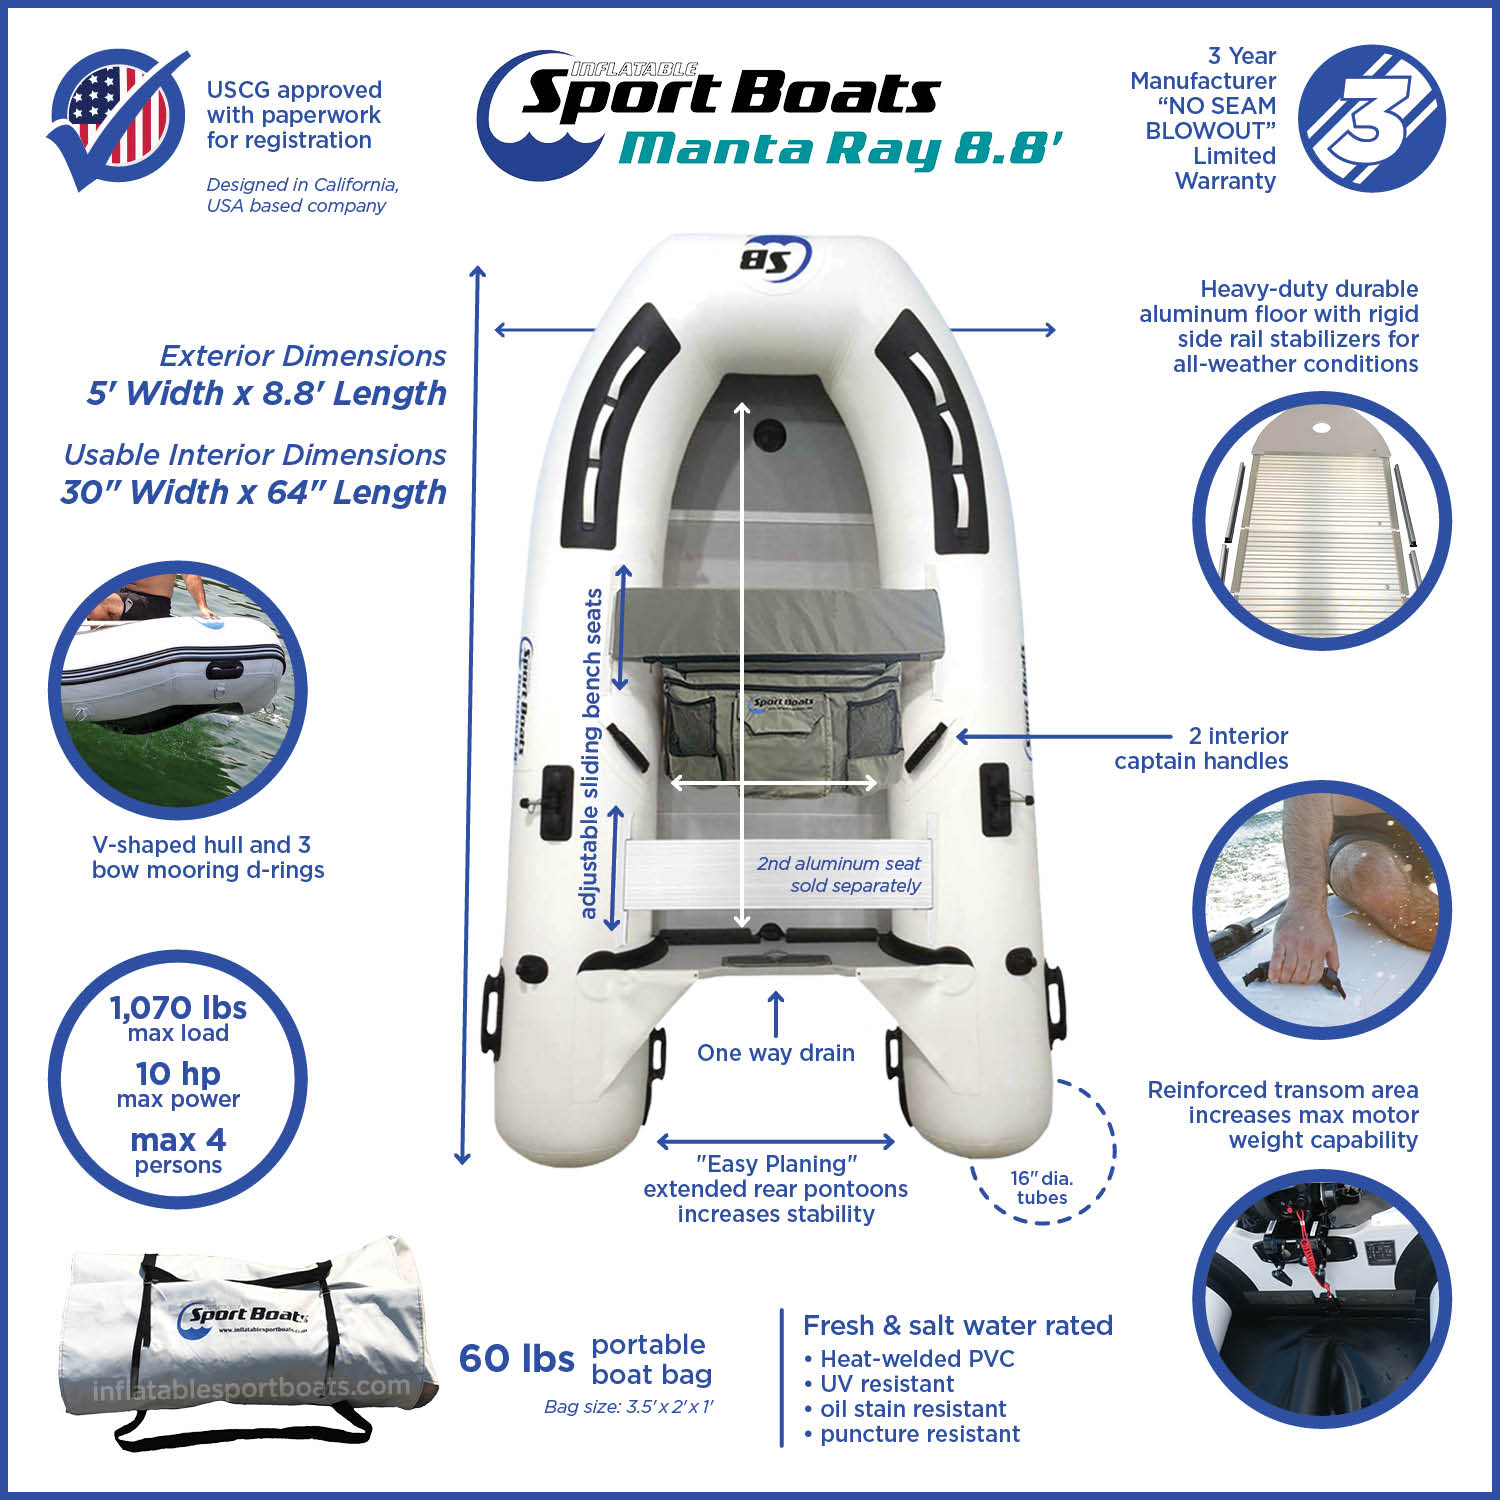 Sport Boats Manta Ray 8.8 dinghy boat features